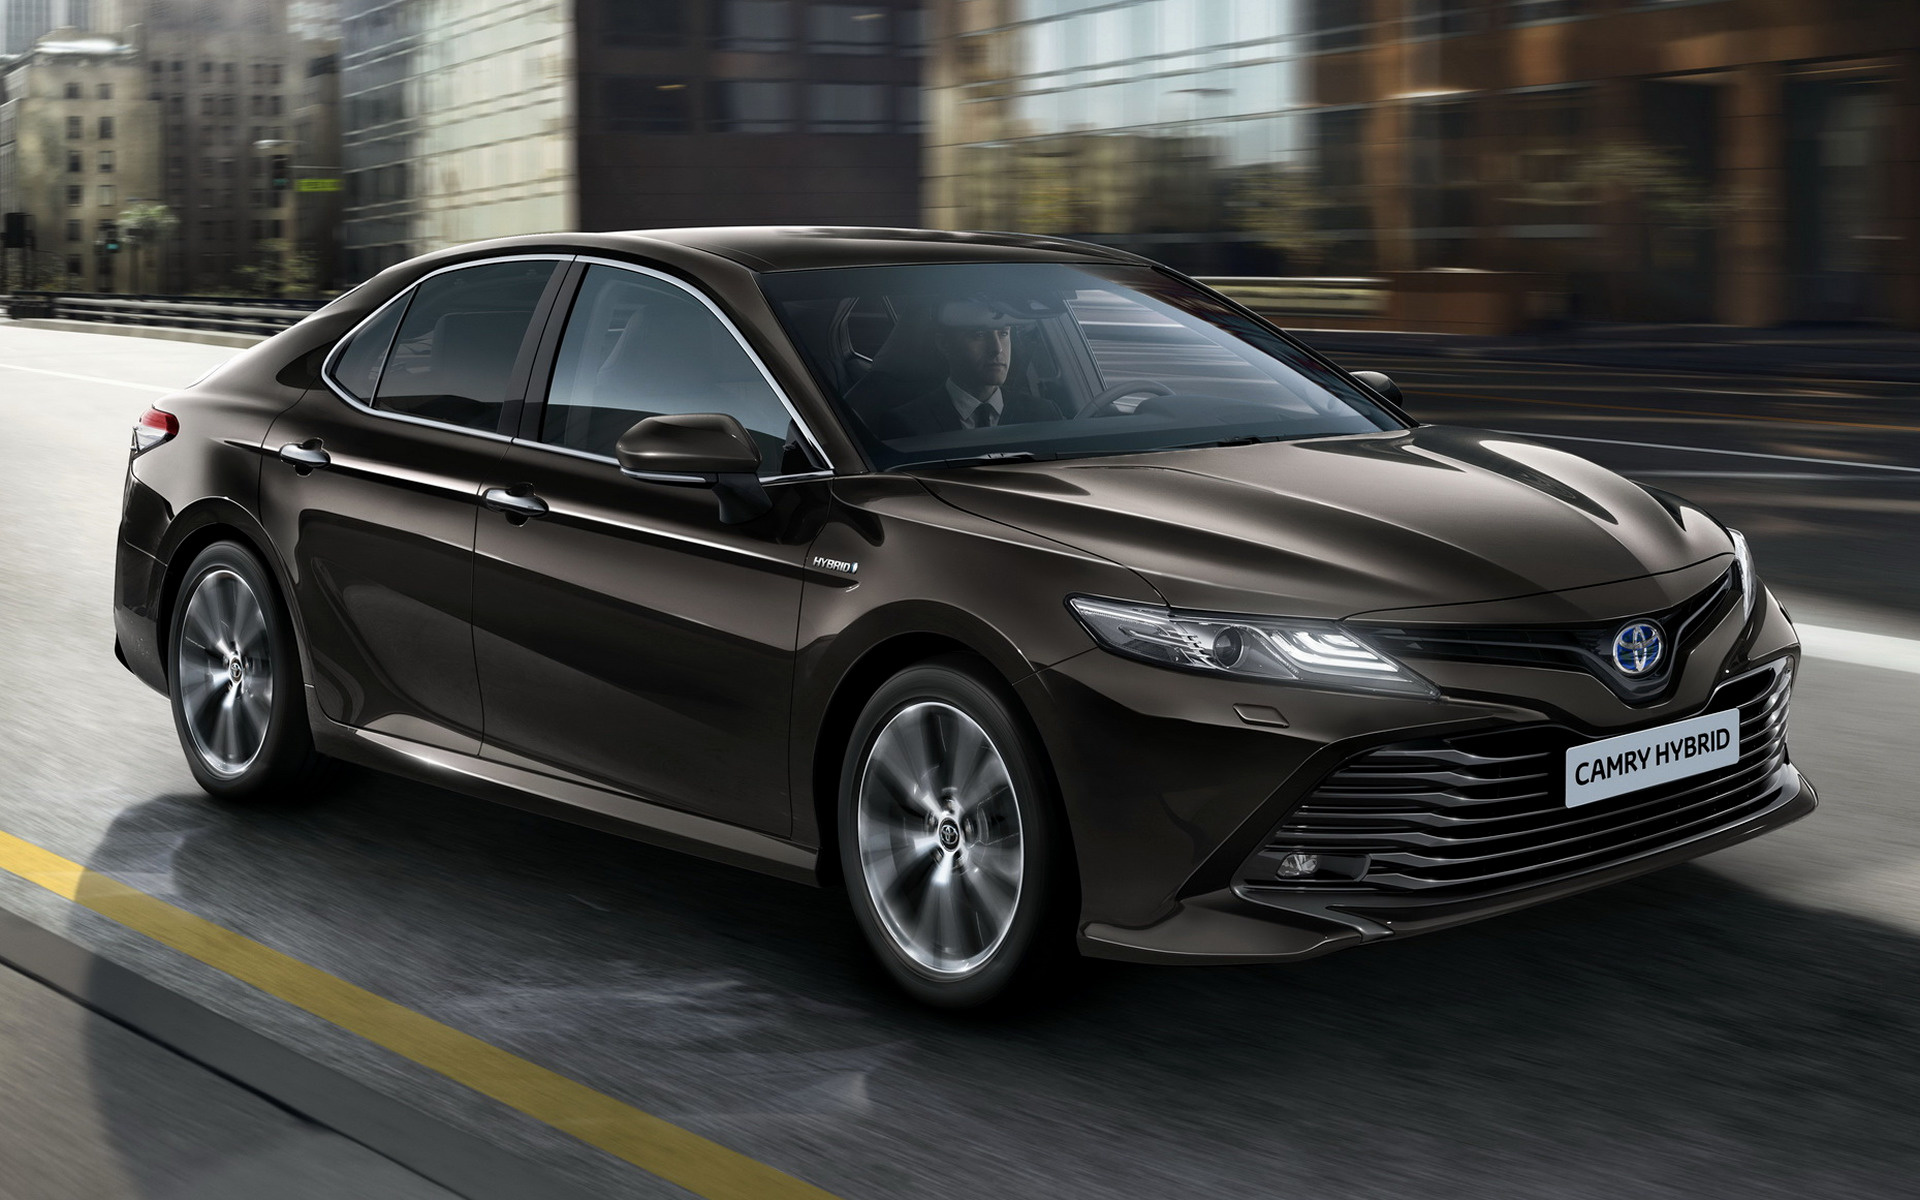 2022 Toyota Camry Hybrid EU Wallpapers and HD Images 